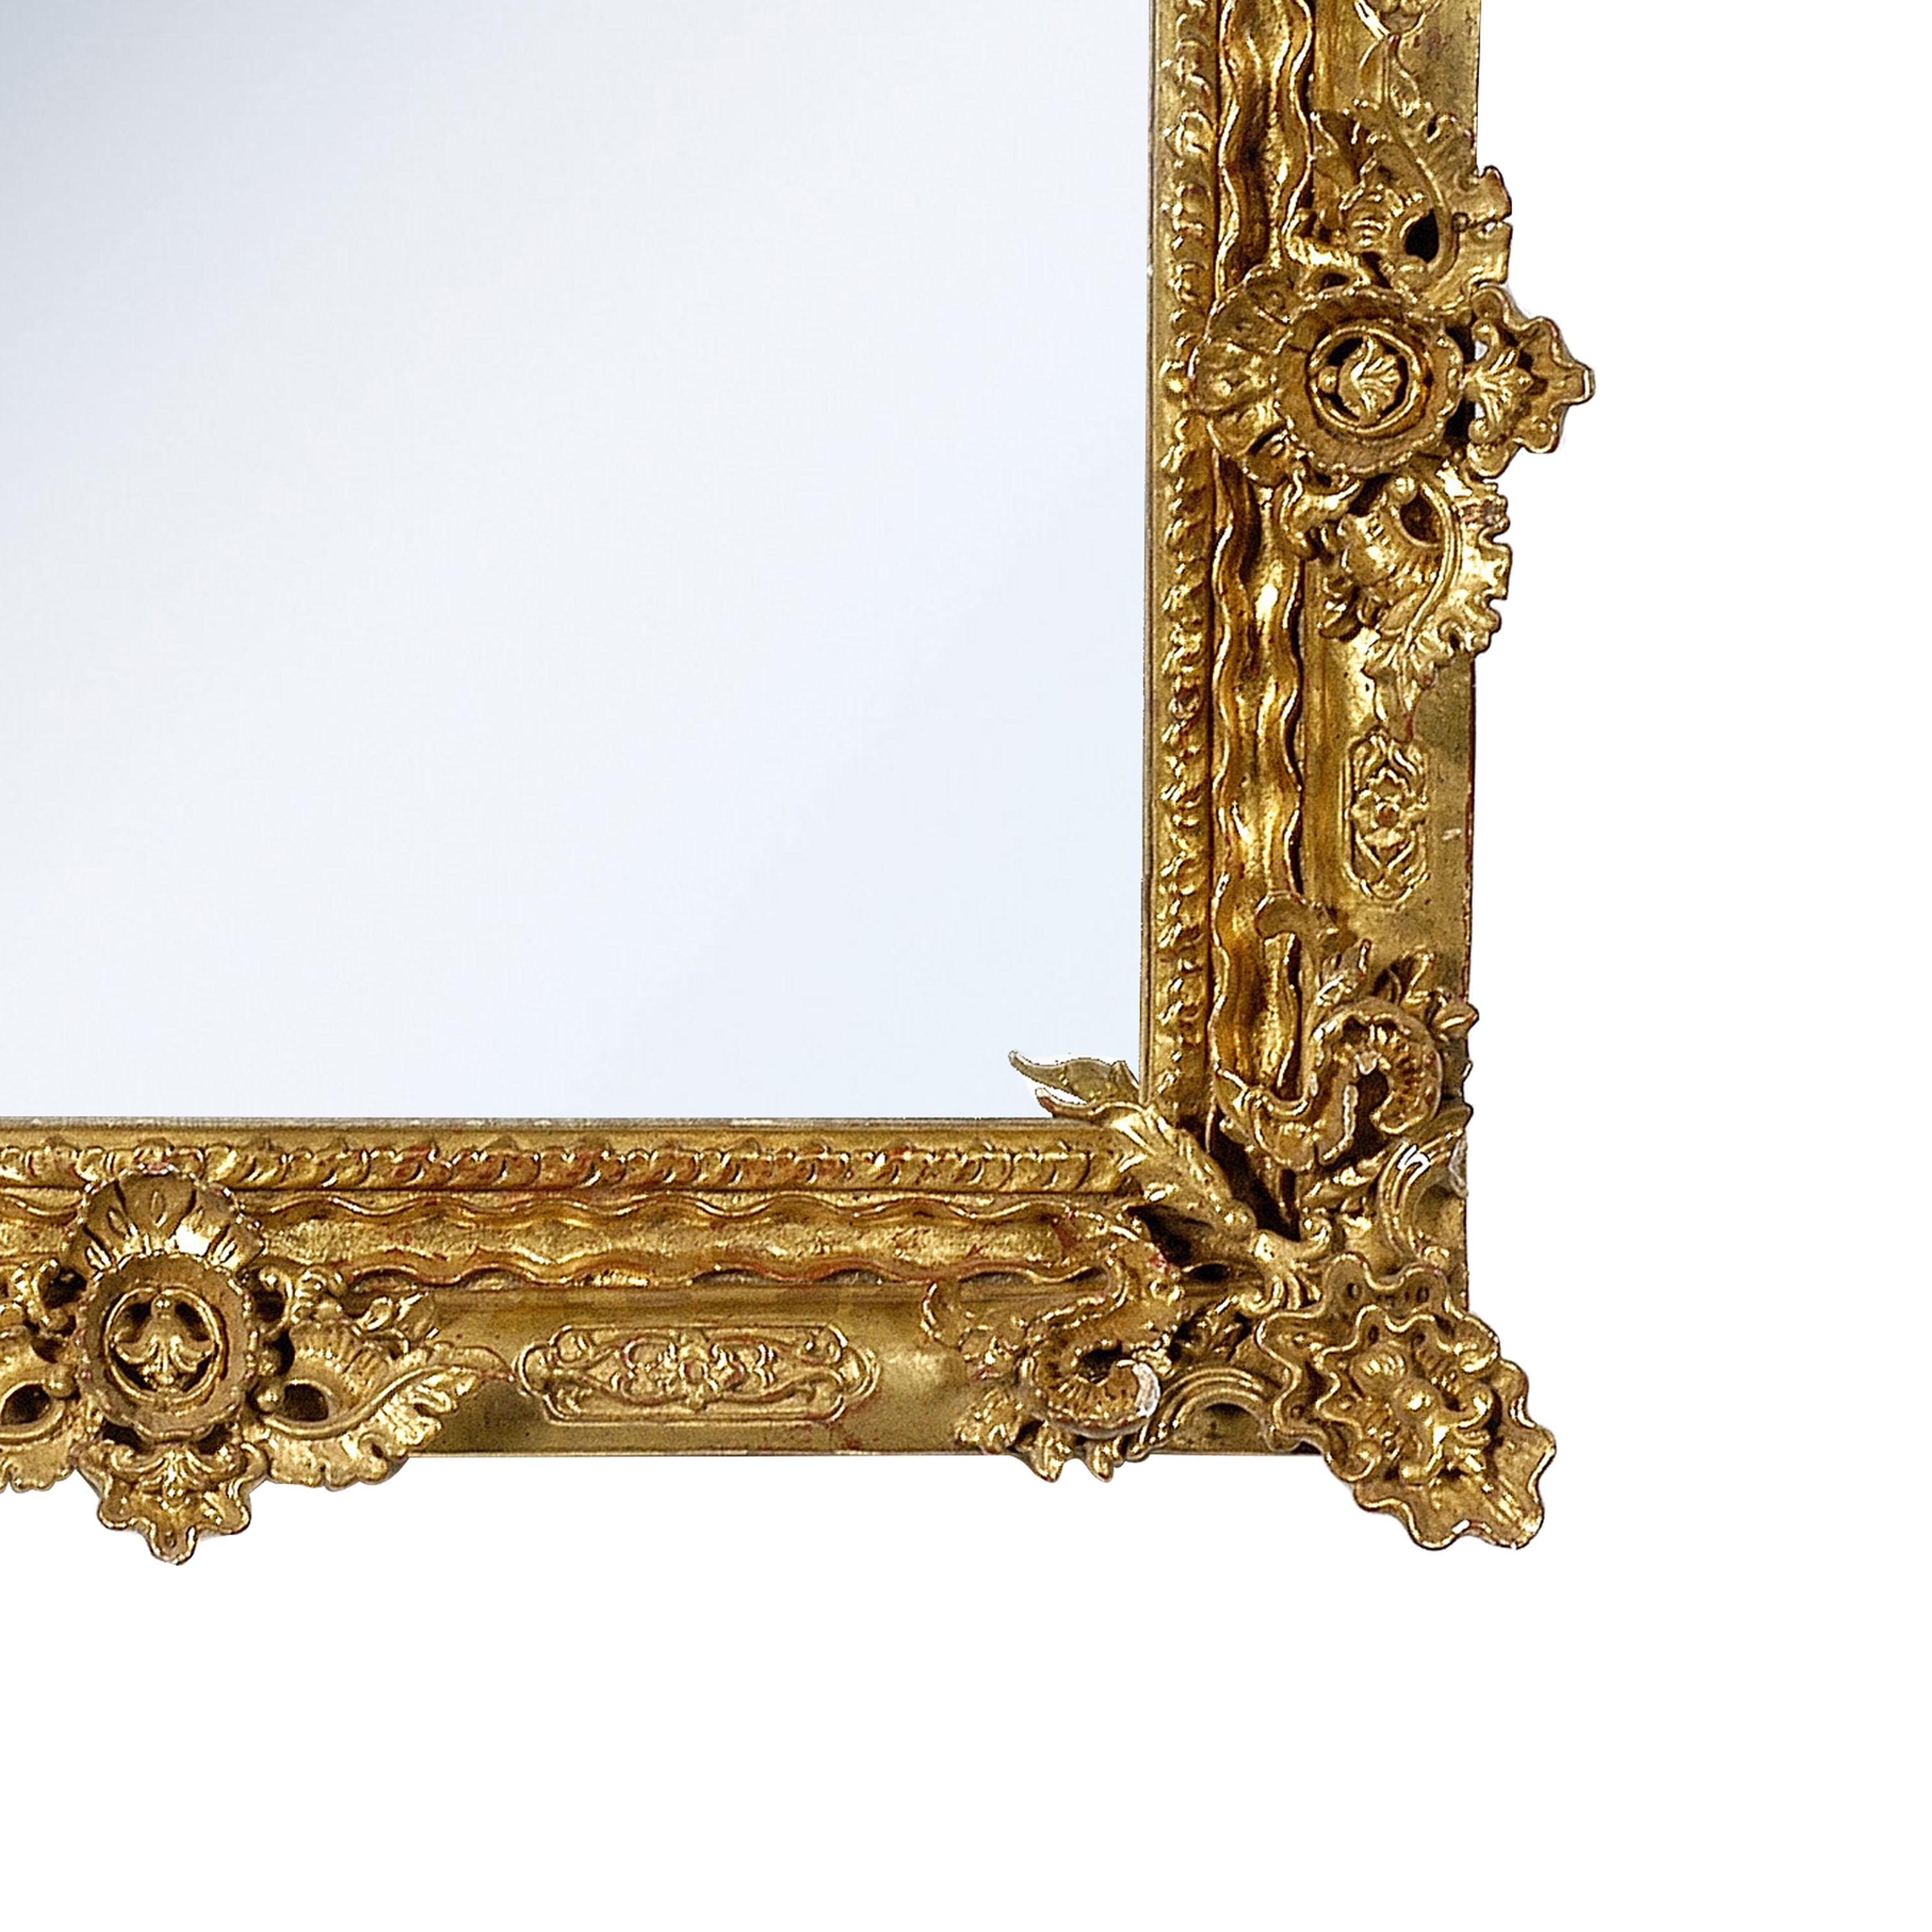 Spanish Regency Rectangular Handcrafted Gold Foil Wood Wall Mirror, 1970